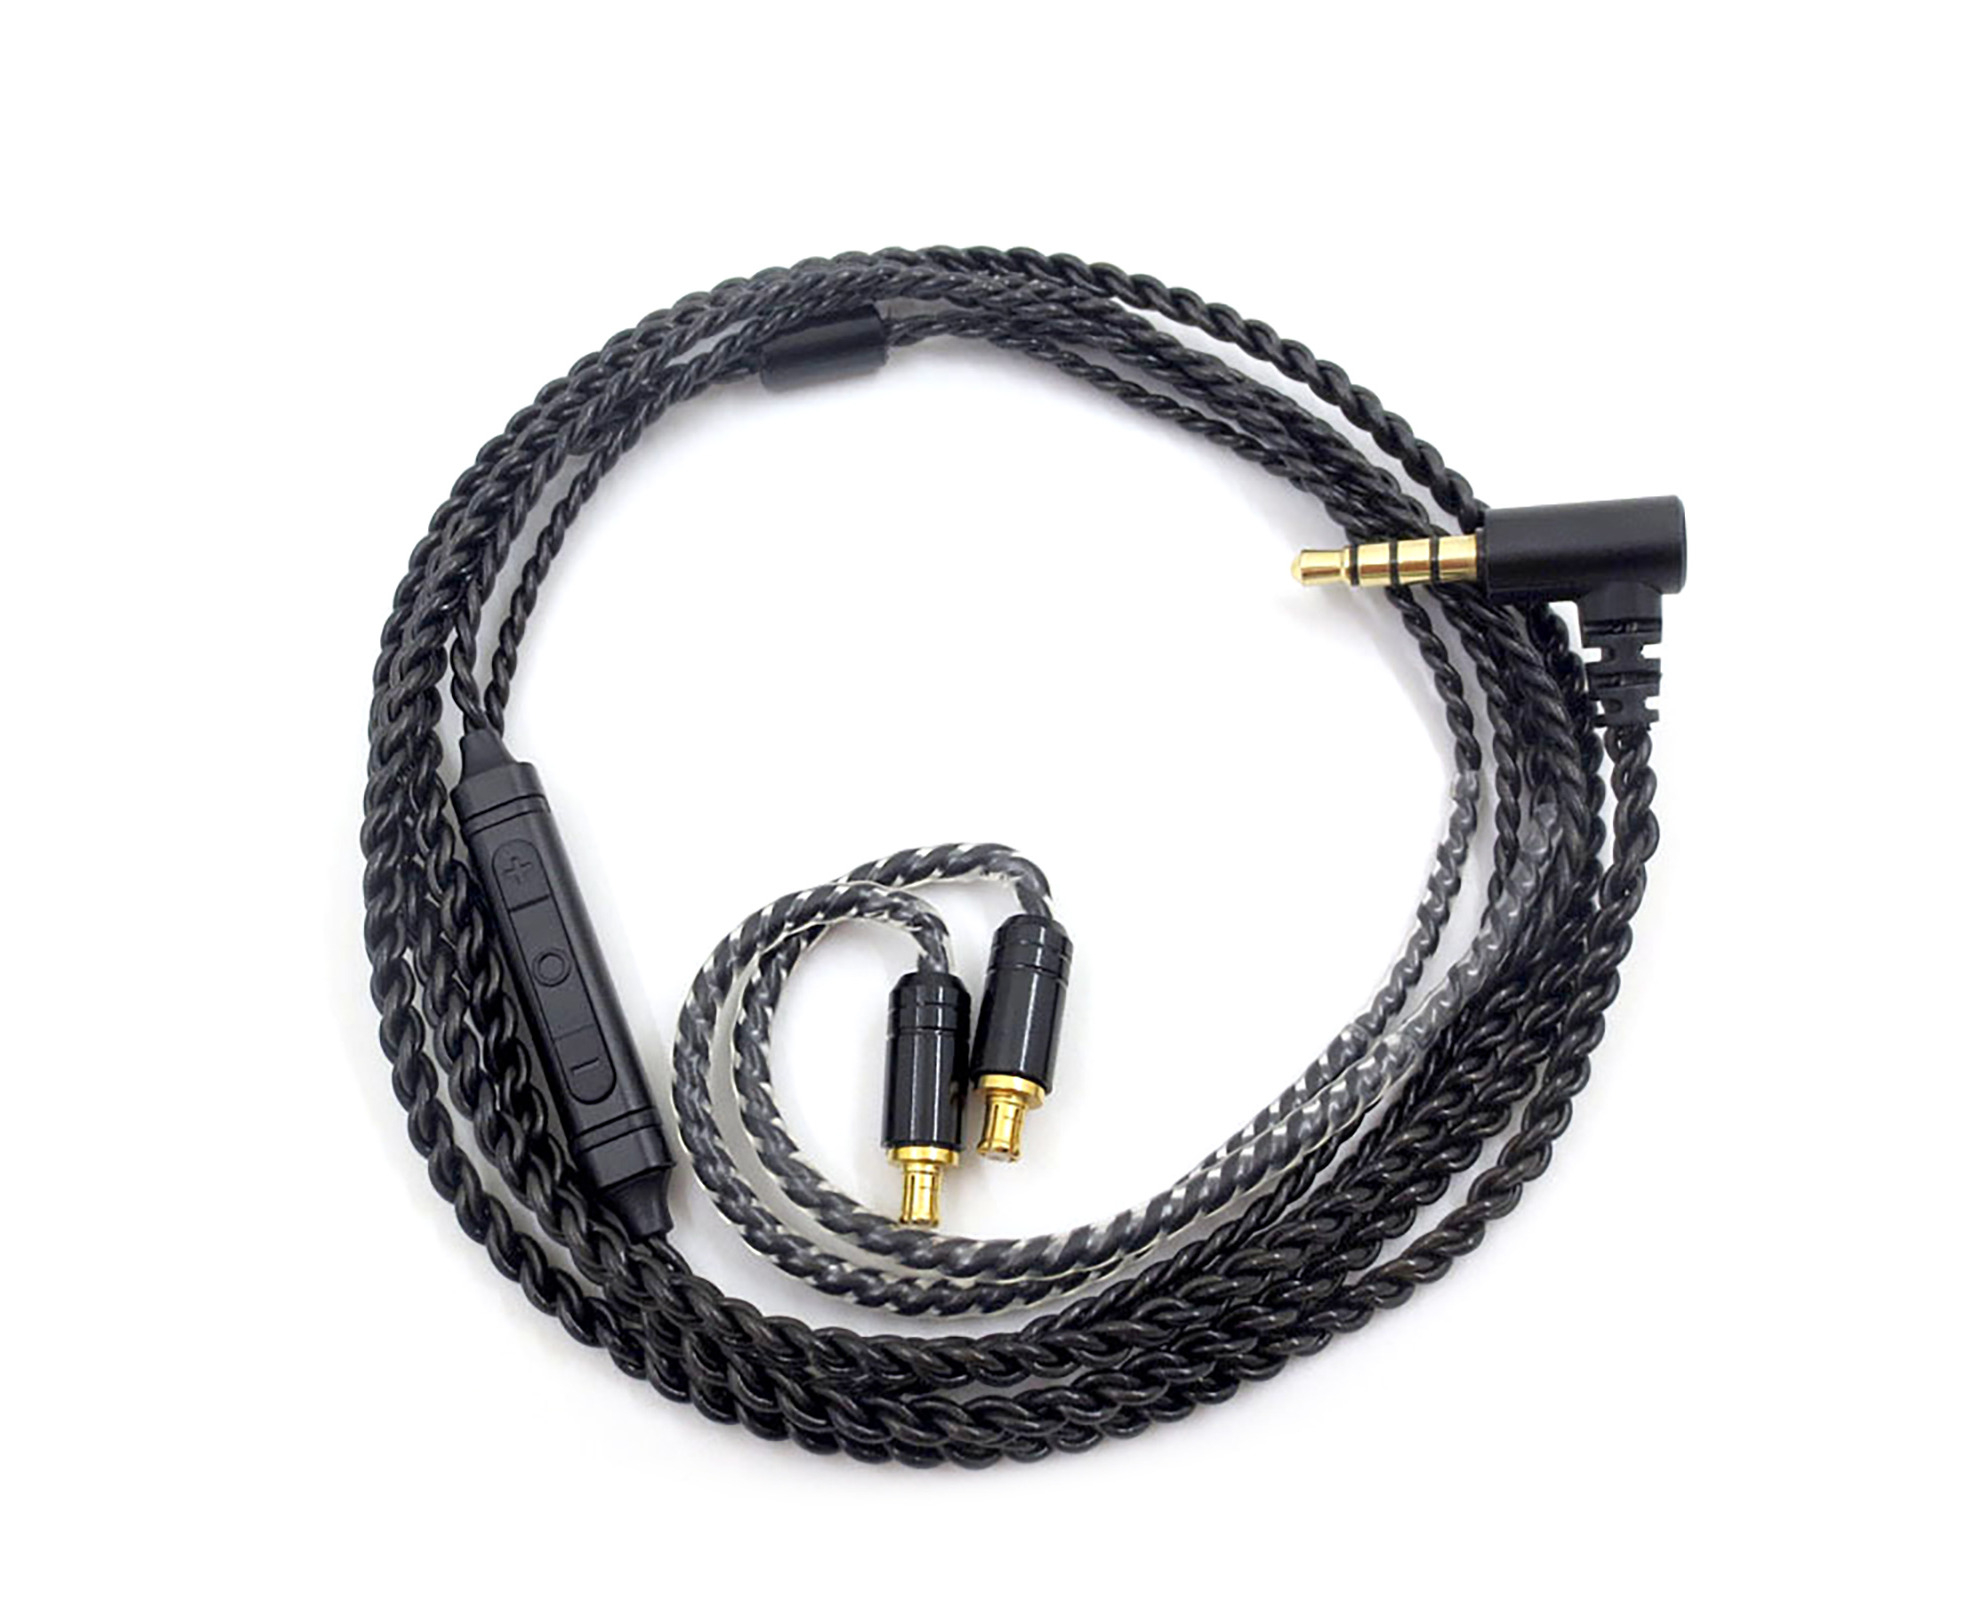 MMCX 3.5mm Detachable Replacement Cable HiFi in Ear Monitor Cable for TIN T2 T3 P1 for Shure SE215 SE315 SE425 SE535 UE900 KBEAR 8 Core Silver Plated Upgrade Earphone Cable 